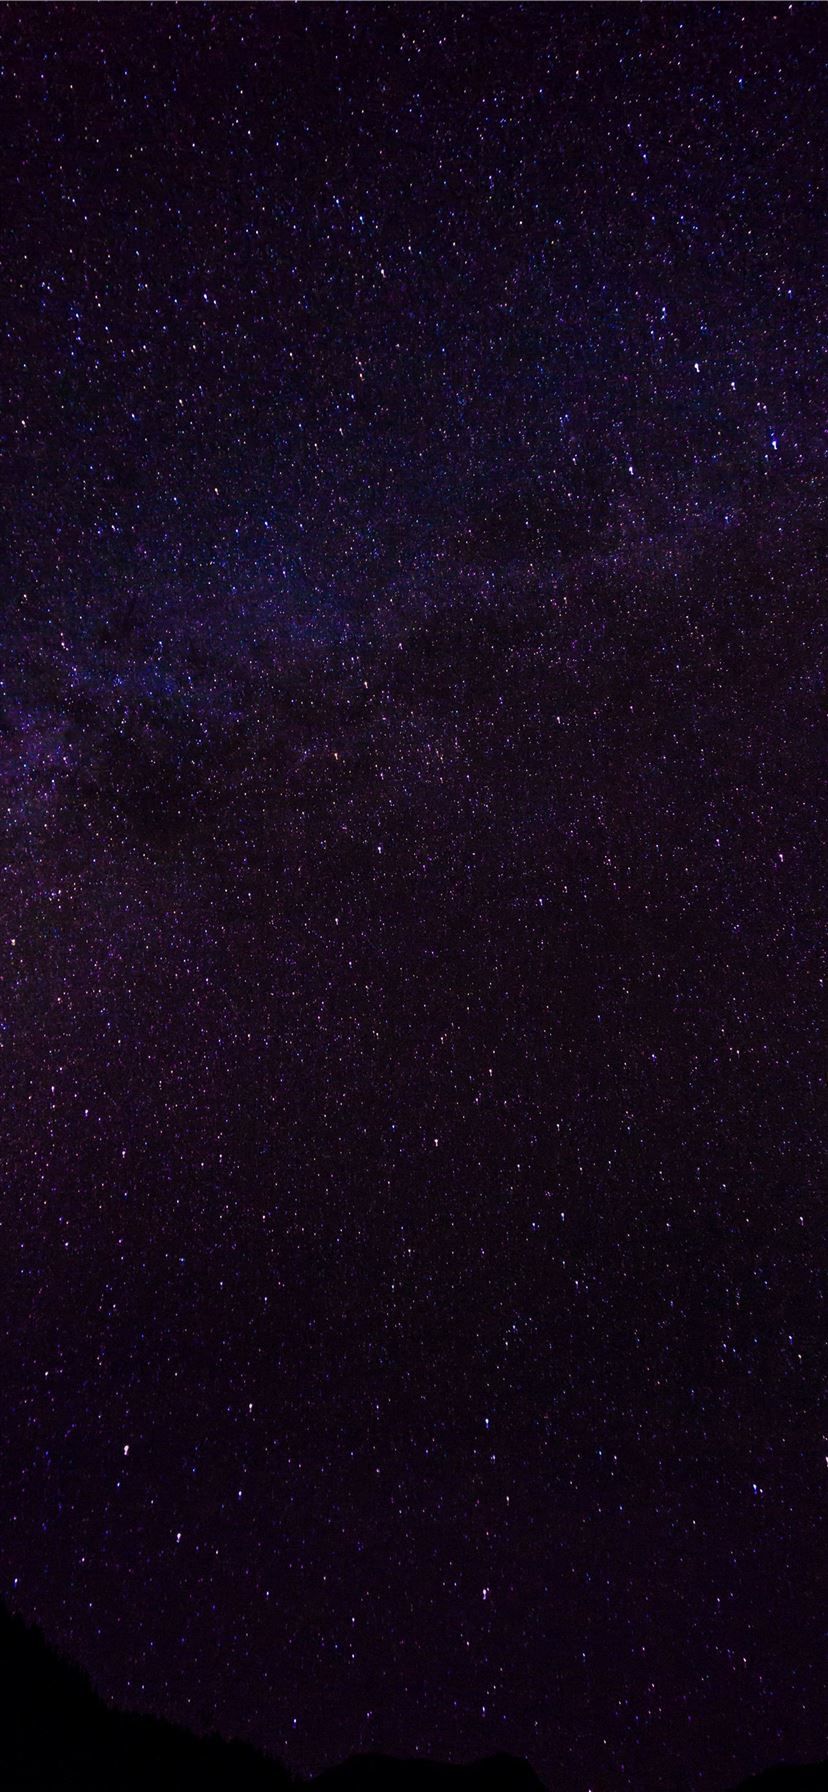 A starry night sky wallpaper for iPhone and Android devices - Dark purple, galaxy